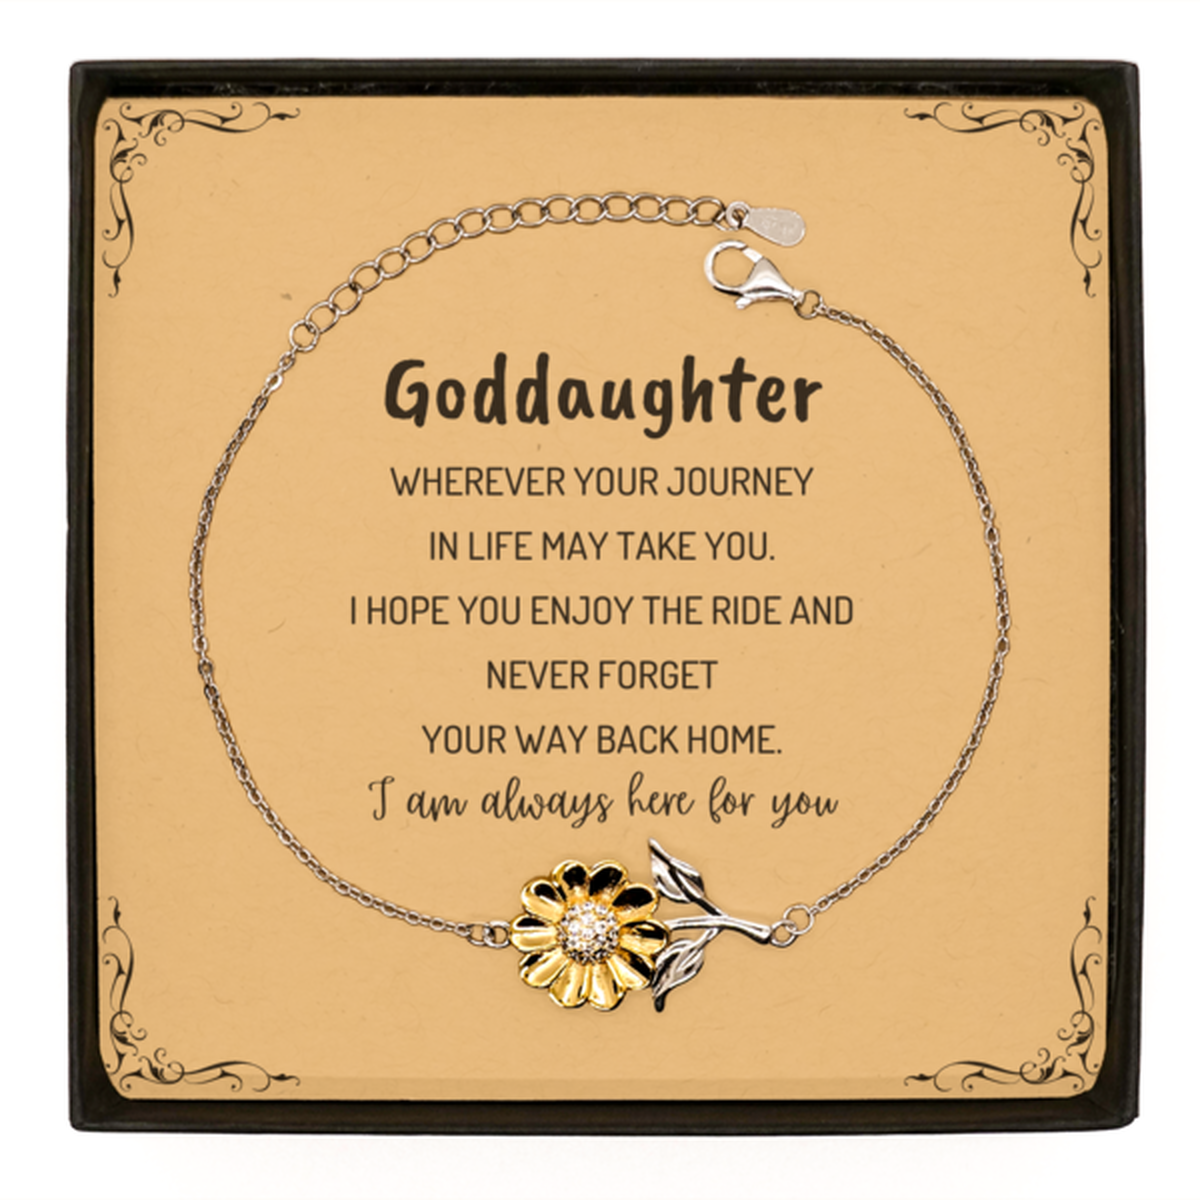 Goddaughter wherever your journey in life may take you, I am always here for you Goddaughter Sunflower Bracelet, Awesome Christmas Gifts For Goddaughter Message Card, Goddaughter Birthday Gifts for Men Women Family Loved One